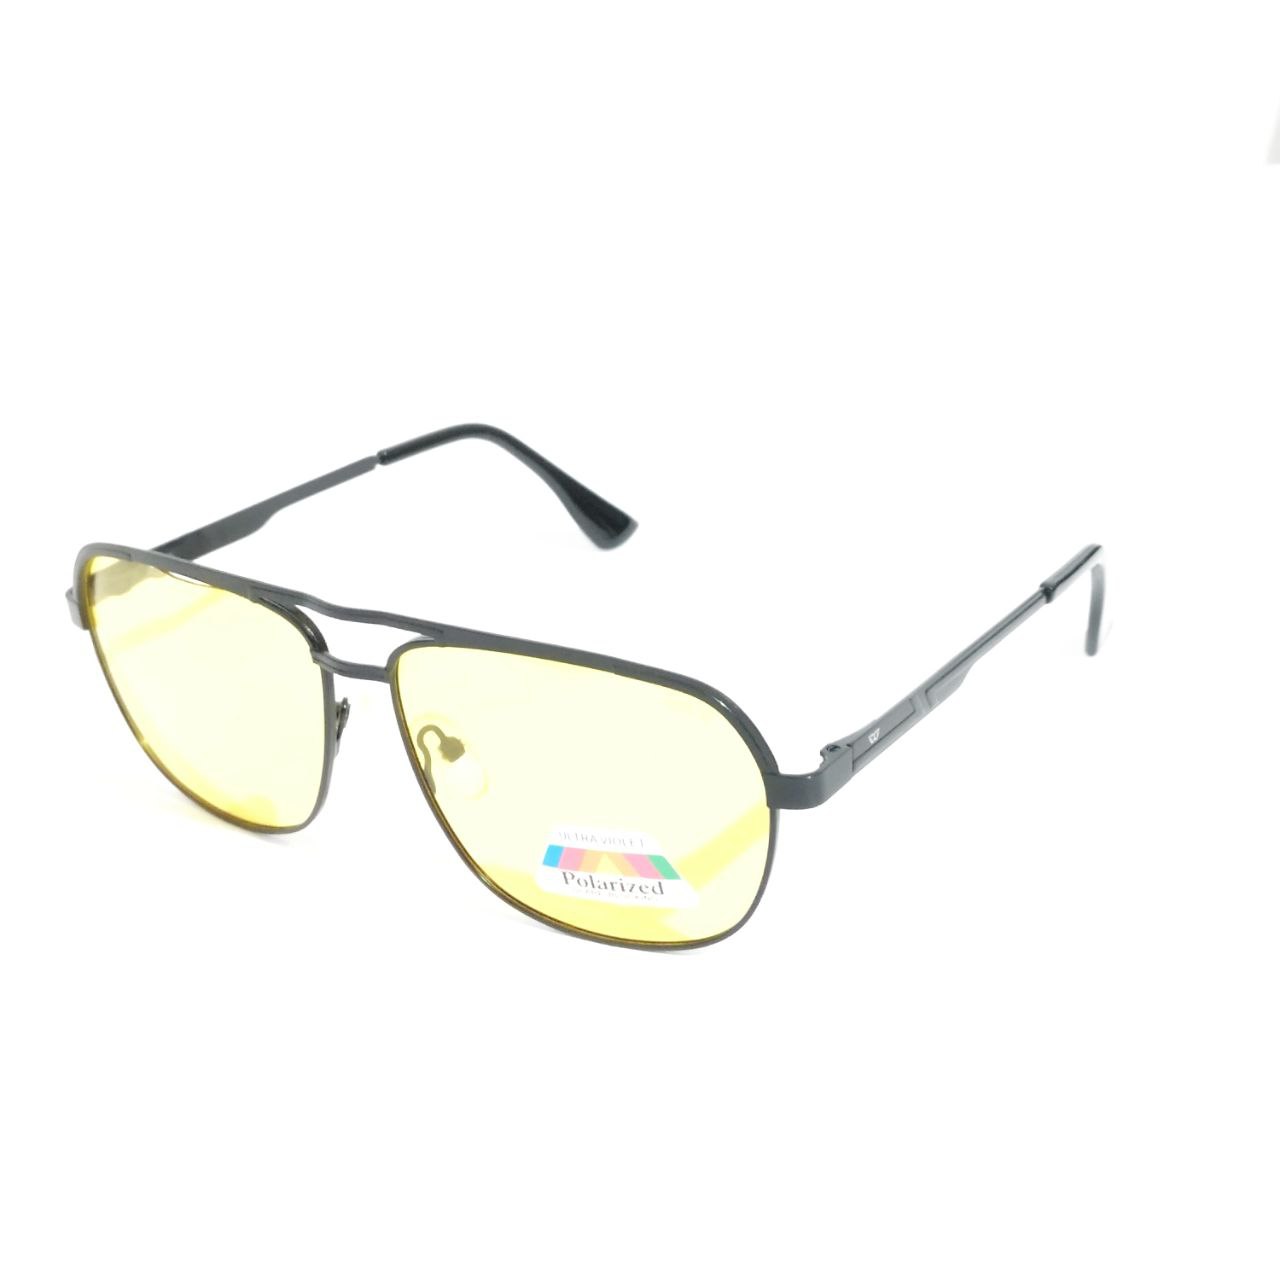 Elite Yellow Polarized Sunglasses for Nighttime Driving